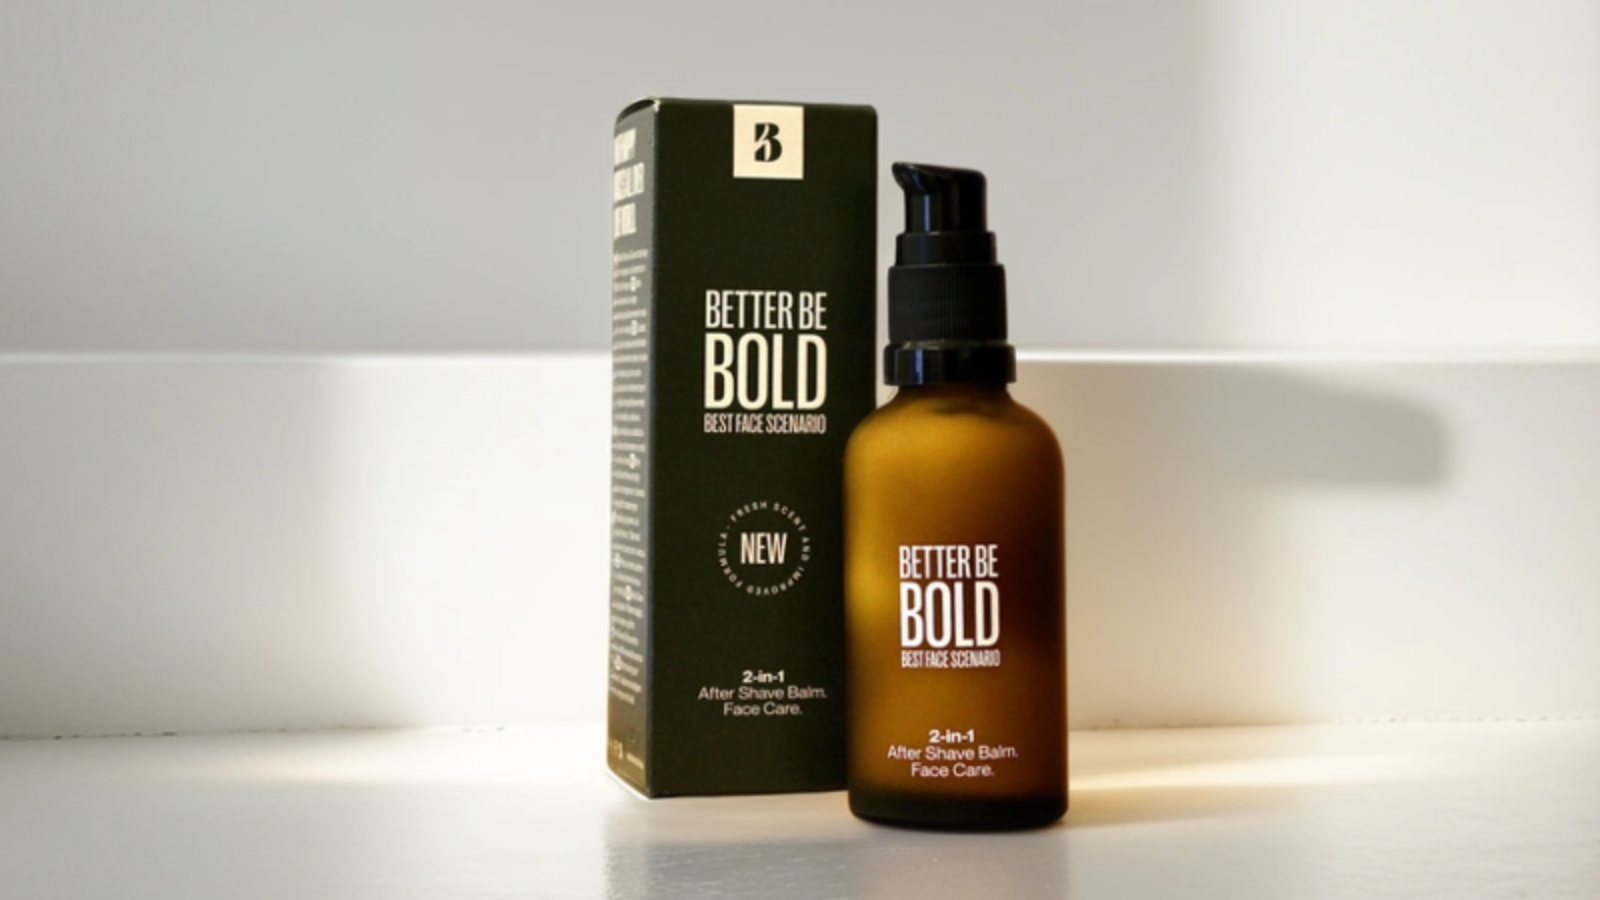 Produkttest Best Face Scenario 2-in-1 After Shave Balm & Face Care von Better be Bold